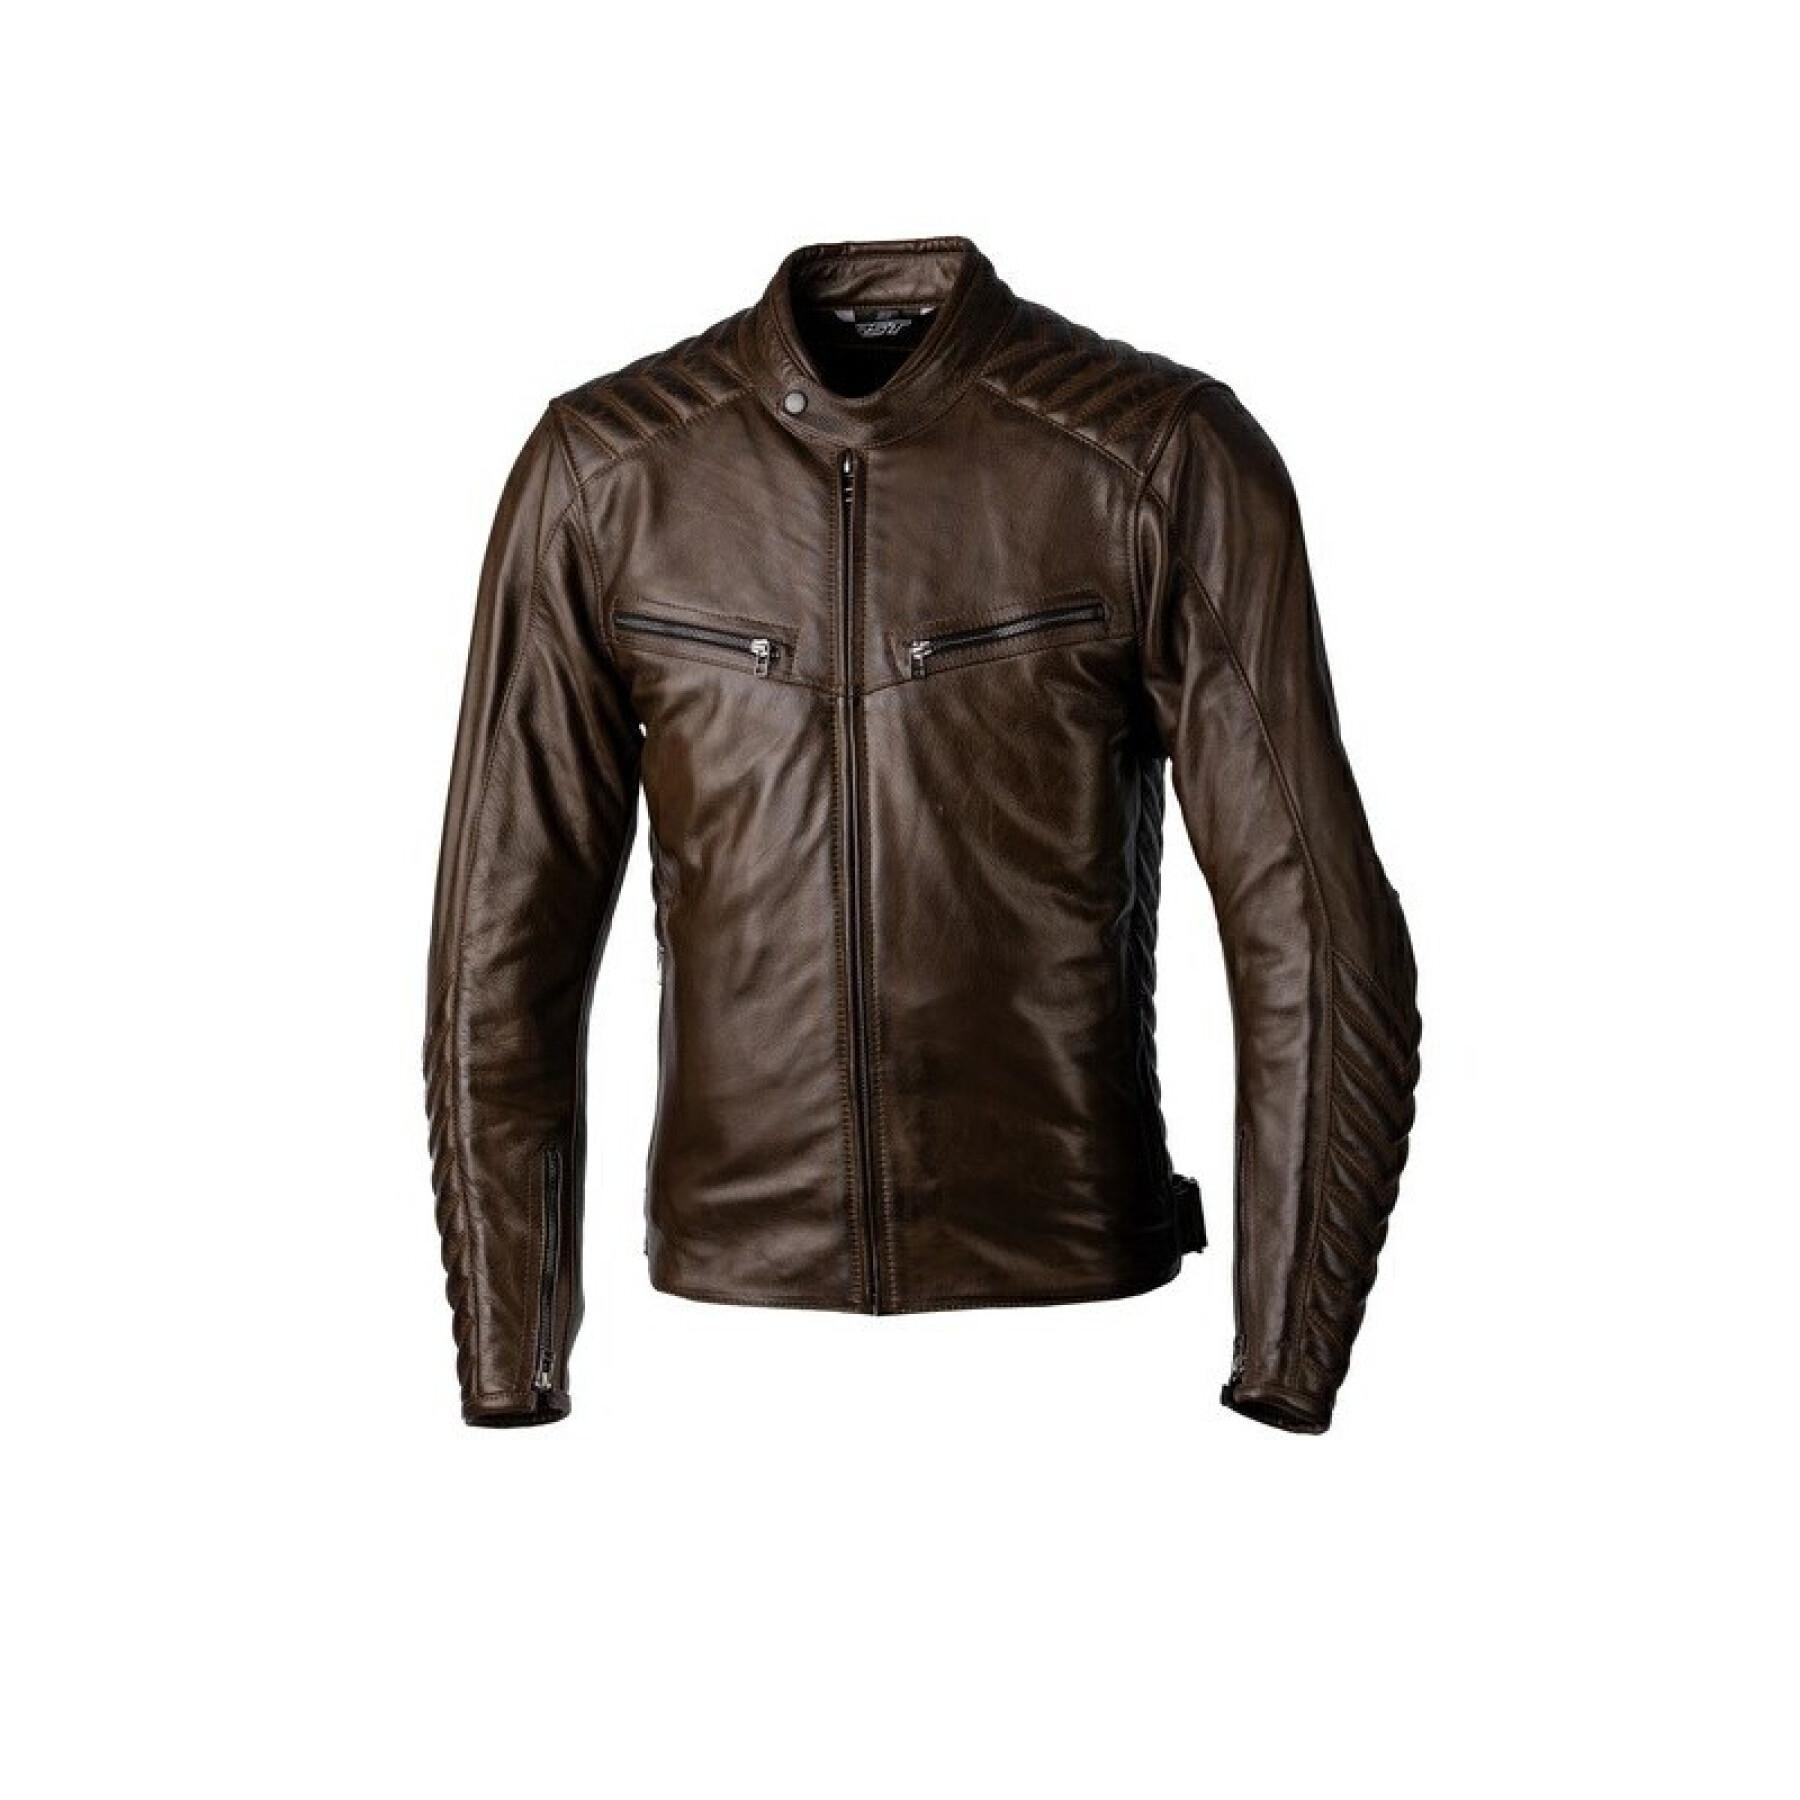 Motorcycle leather jacket RST Roadster 3 CE